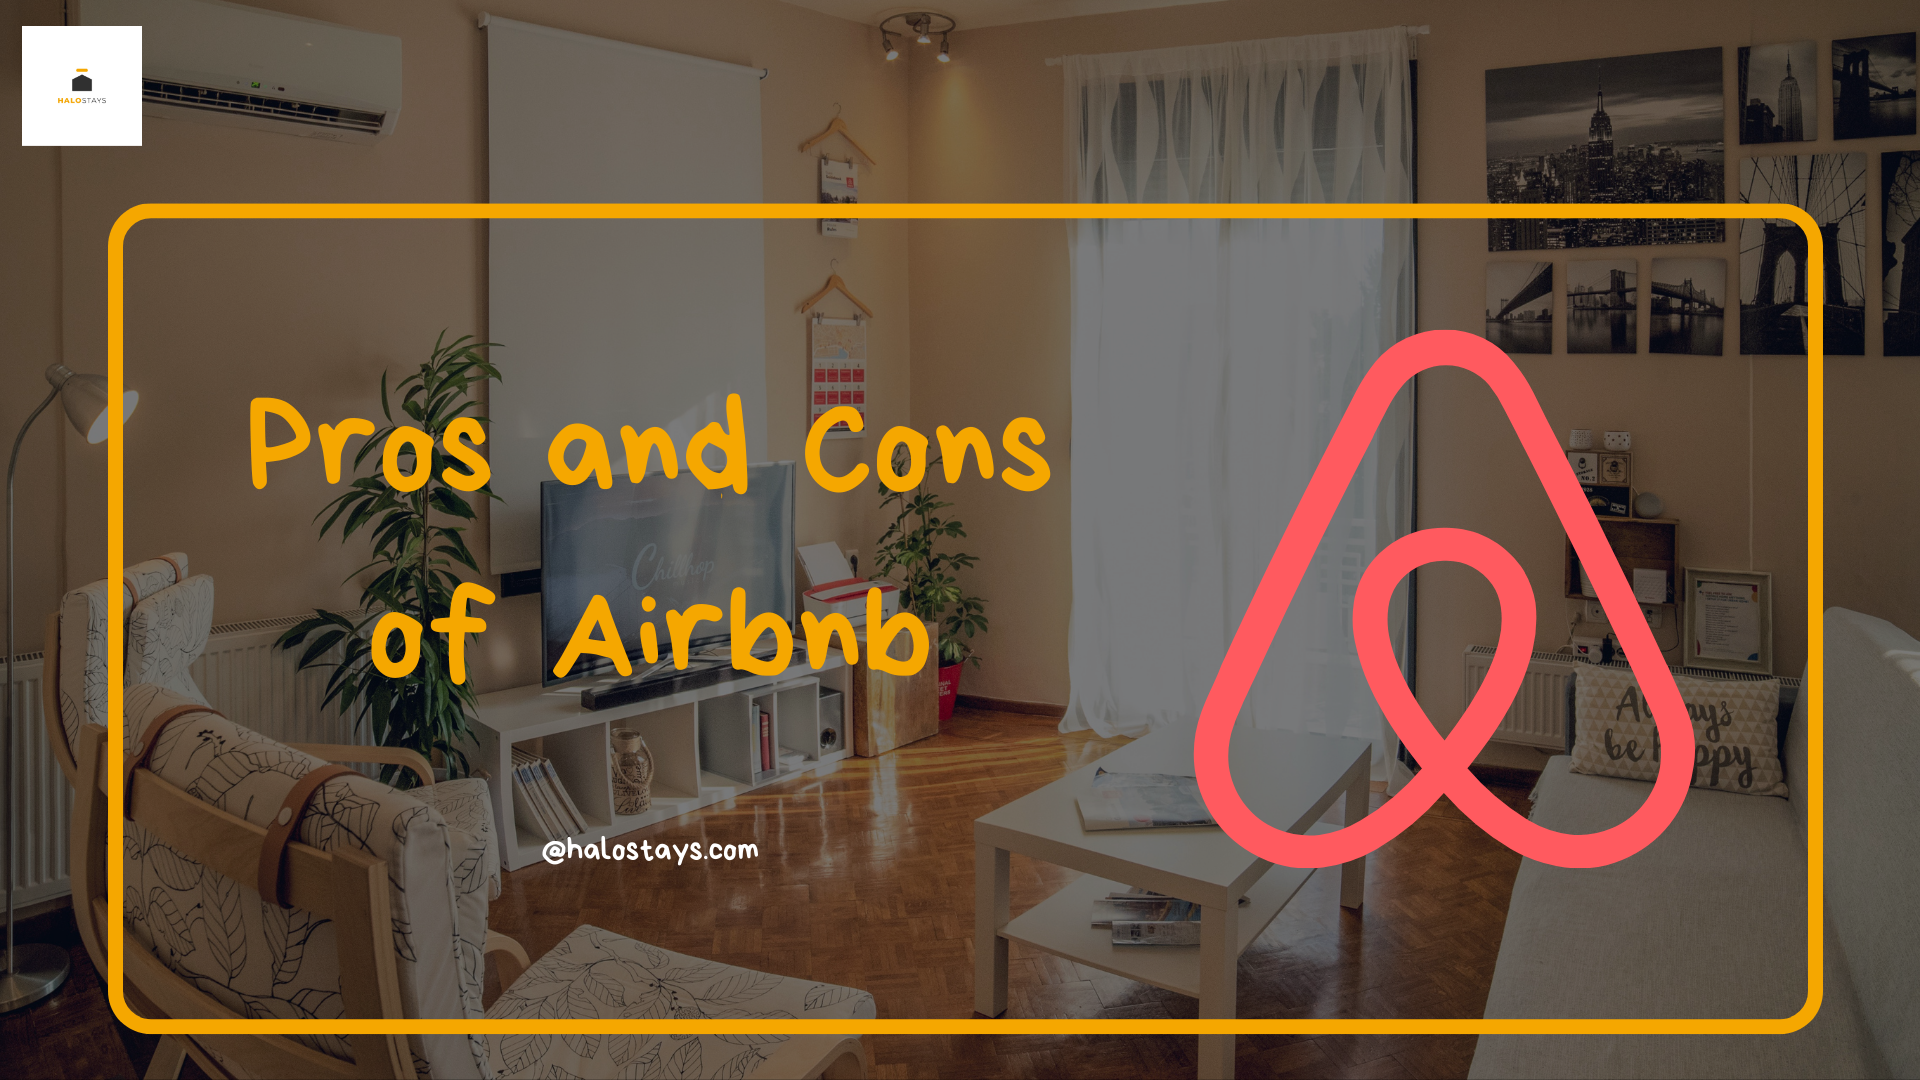 What are the pros and cons of Aribnb?